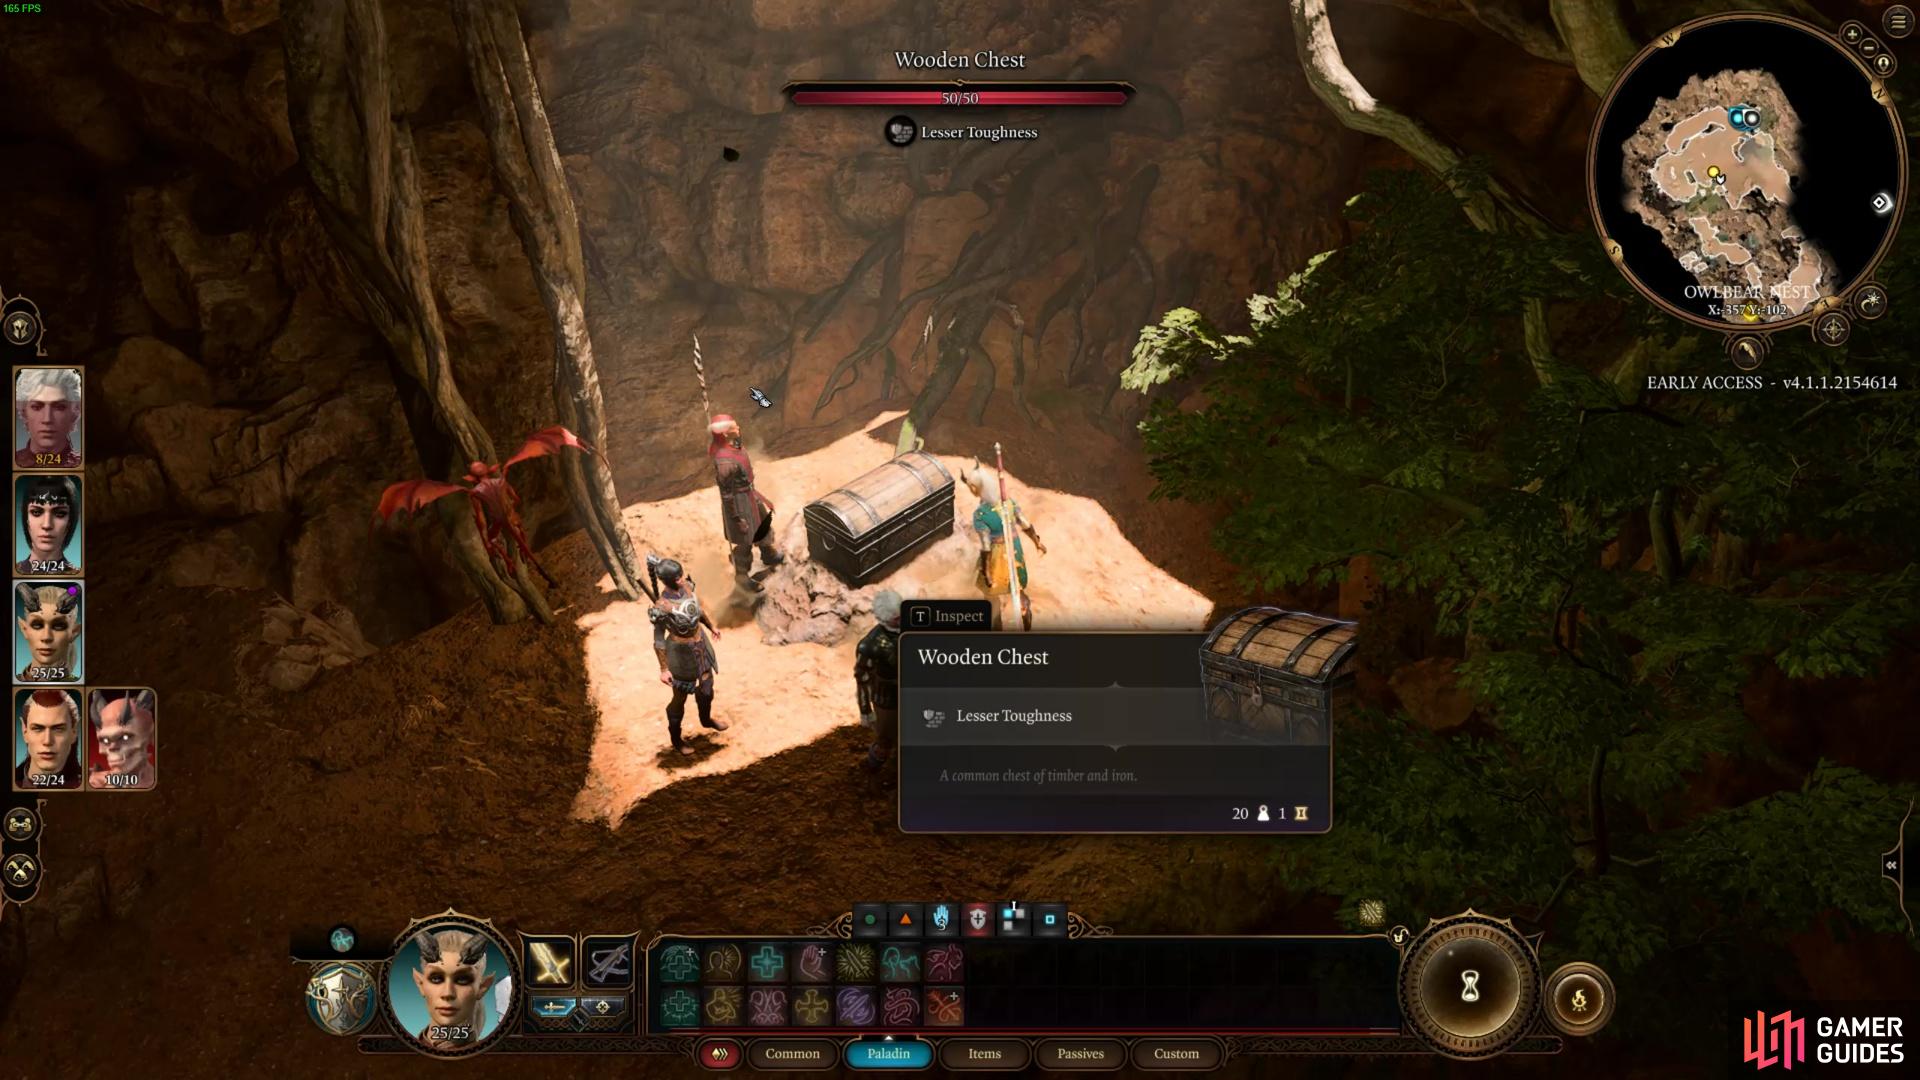 Here is how to get the Owlbear Chest in Baldurs Gate 3.